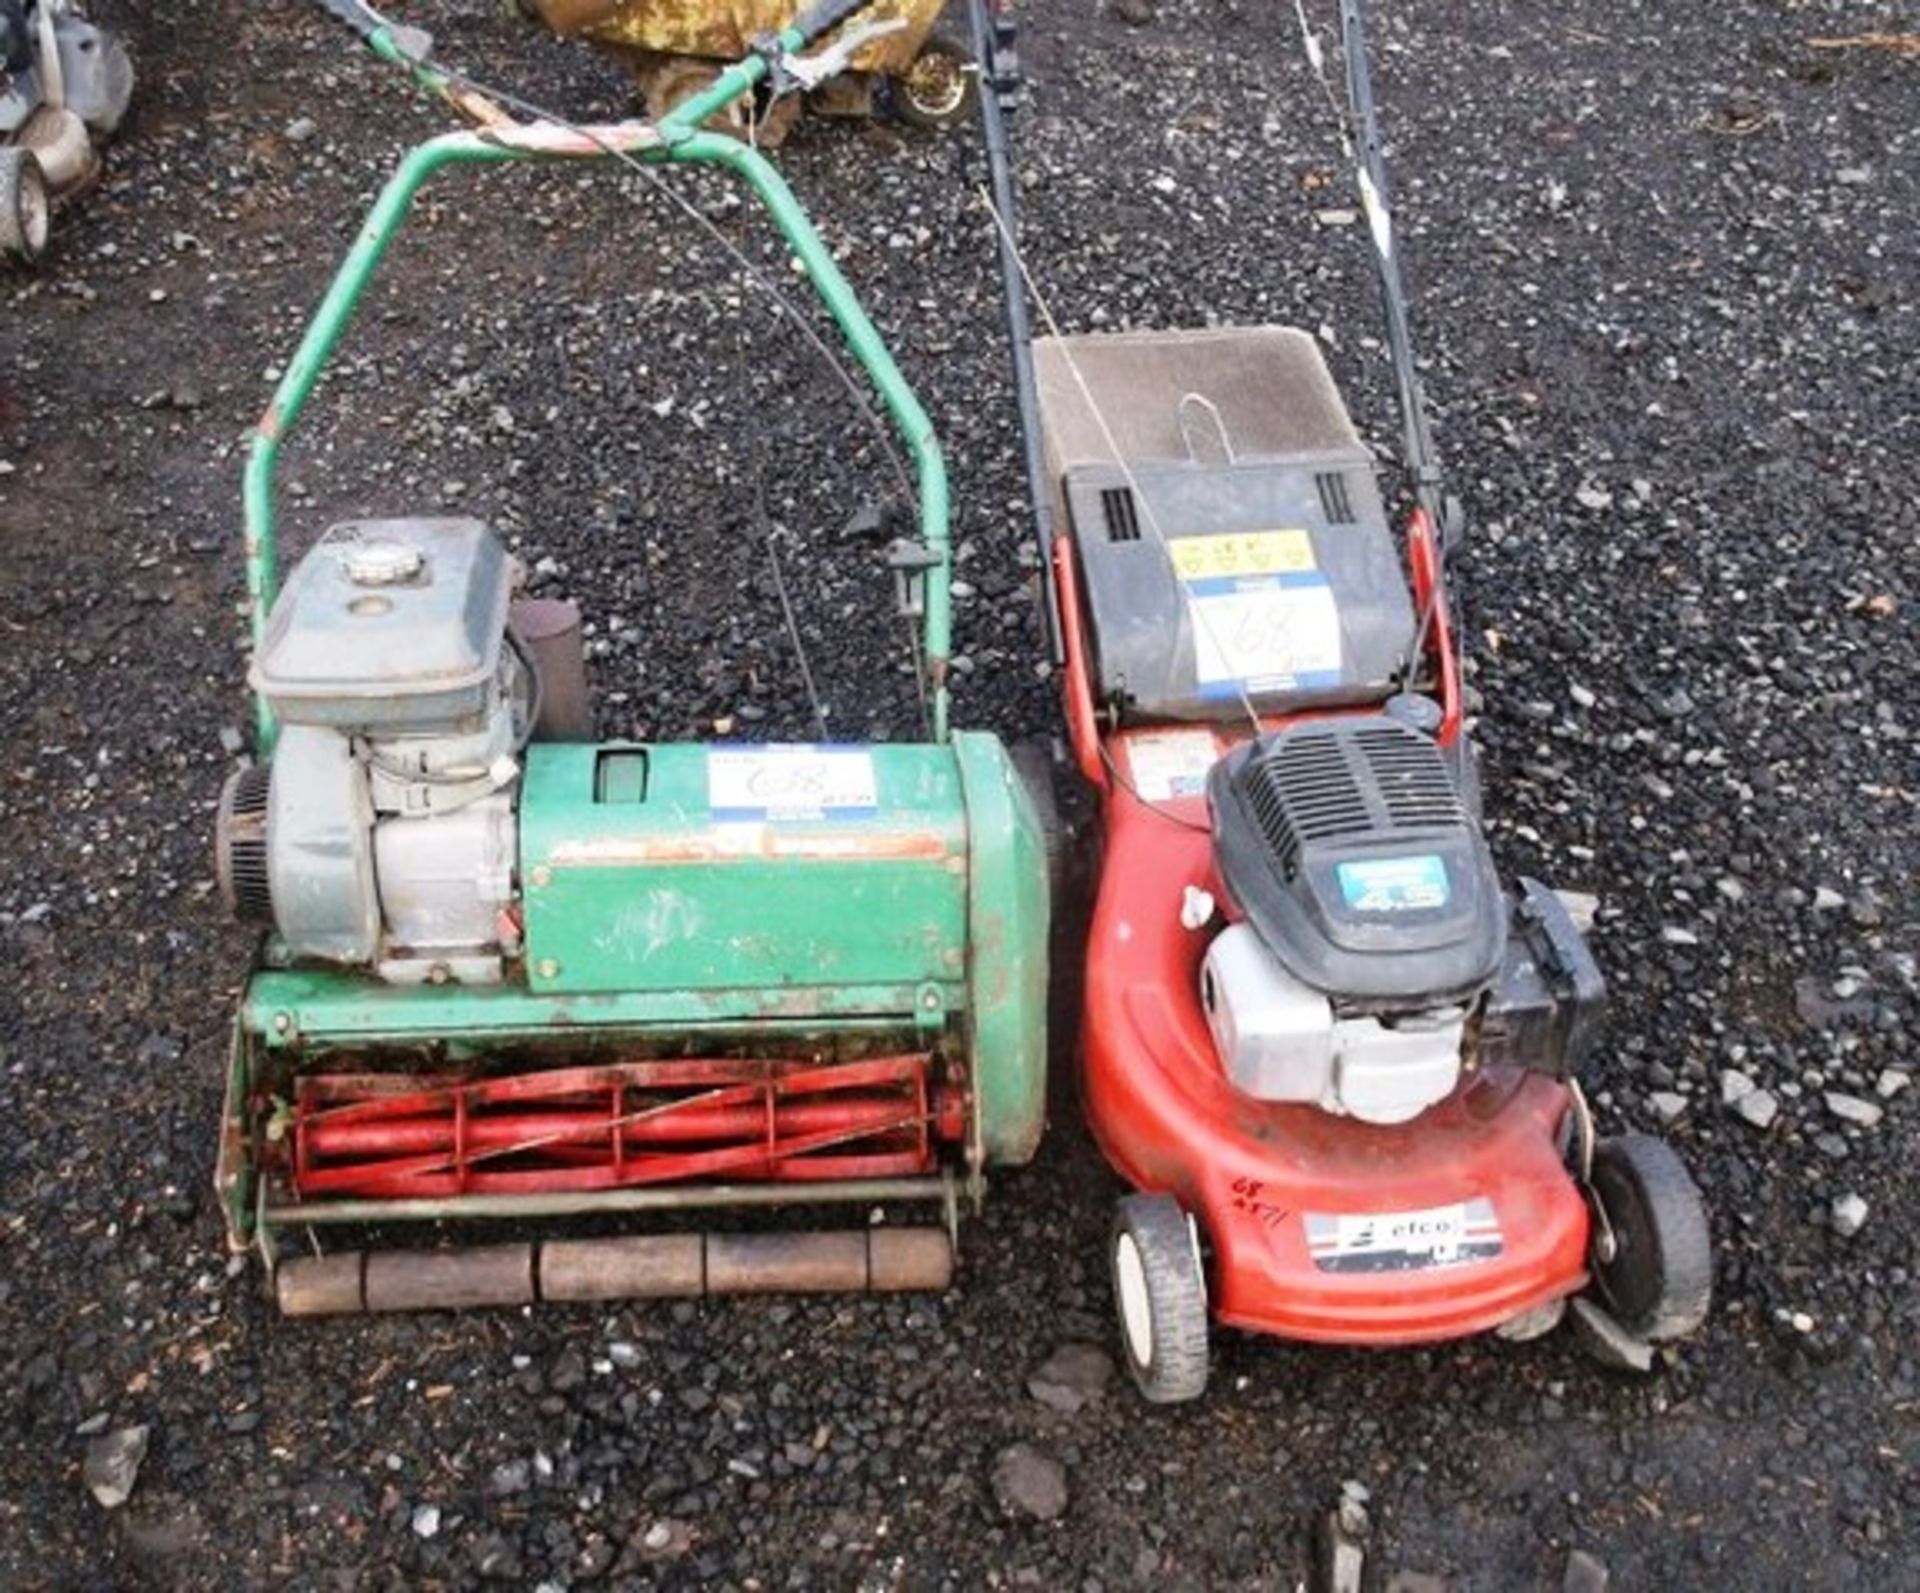 1 X RANSOMES MARQUIS 61 CYLINDER MOWER & 1 X EFCO ROTARY MOWER**DIRECT FROM HISTORIC SCOTLAND**